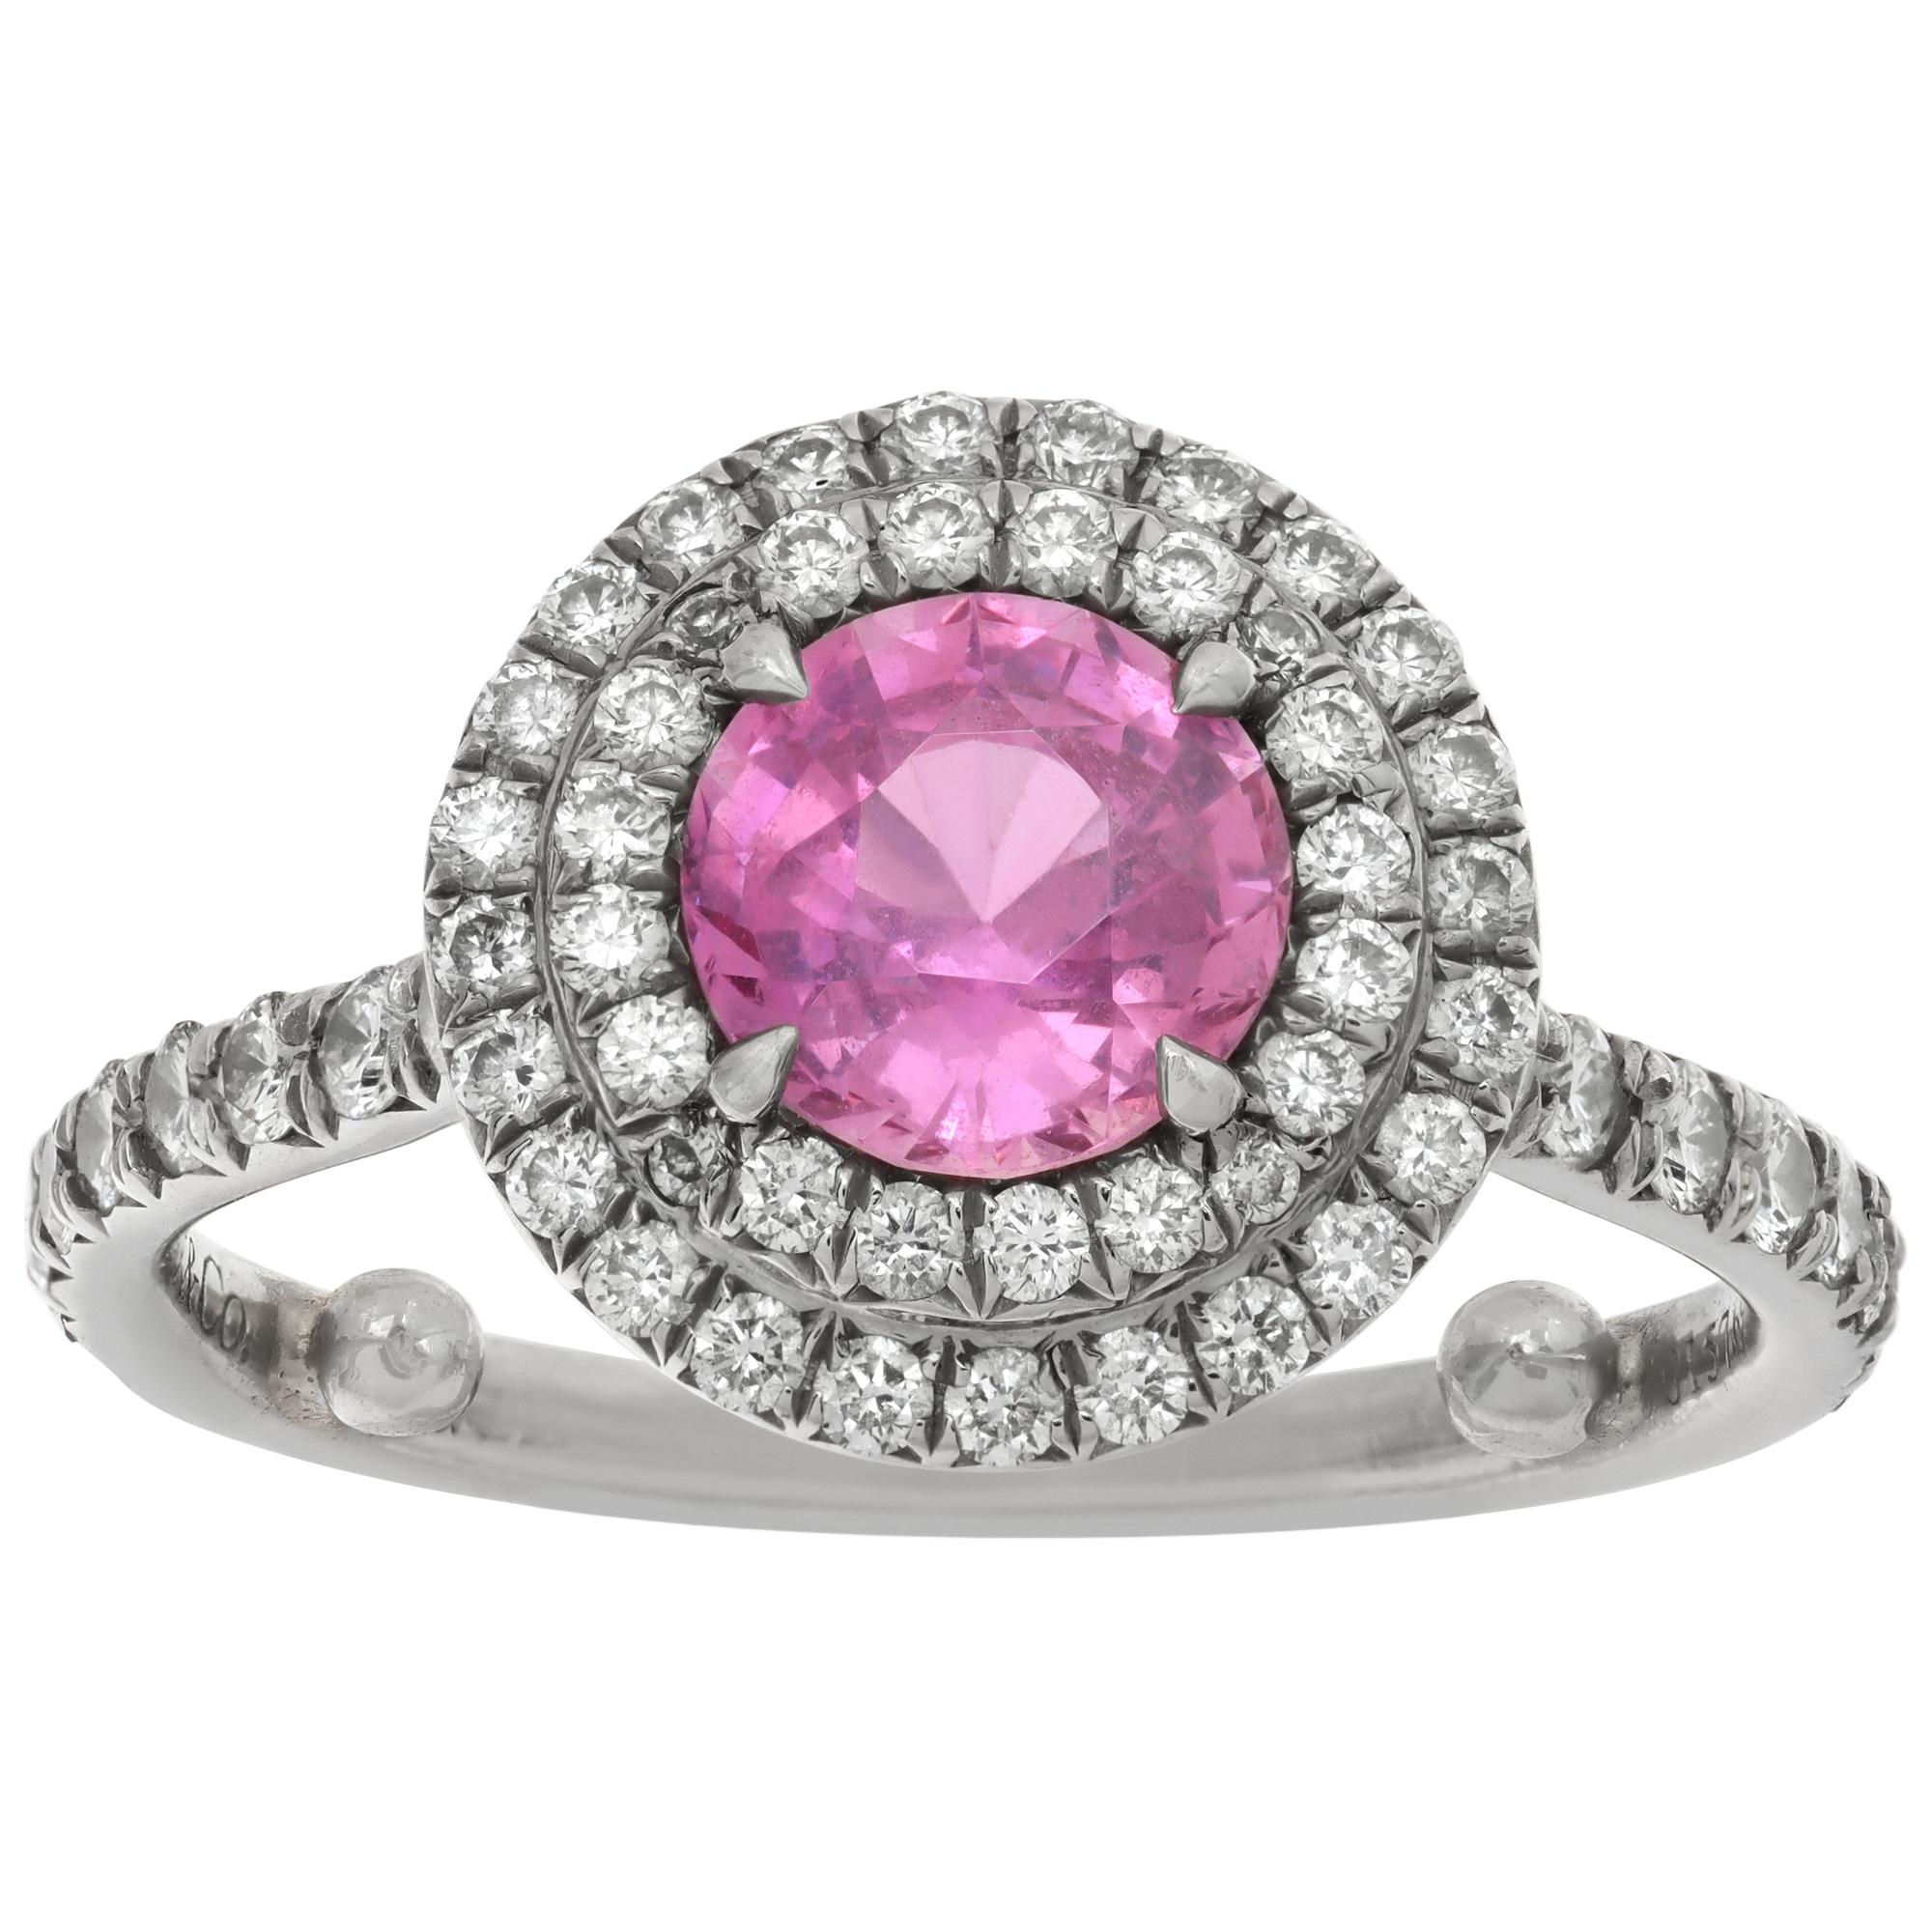 Tiffany & Co.ring with pink sapphire and diamonds (Stones)